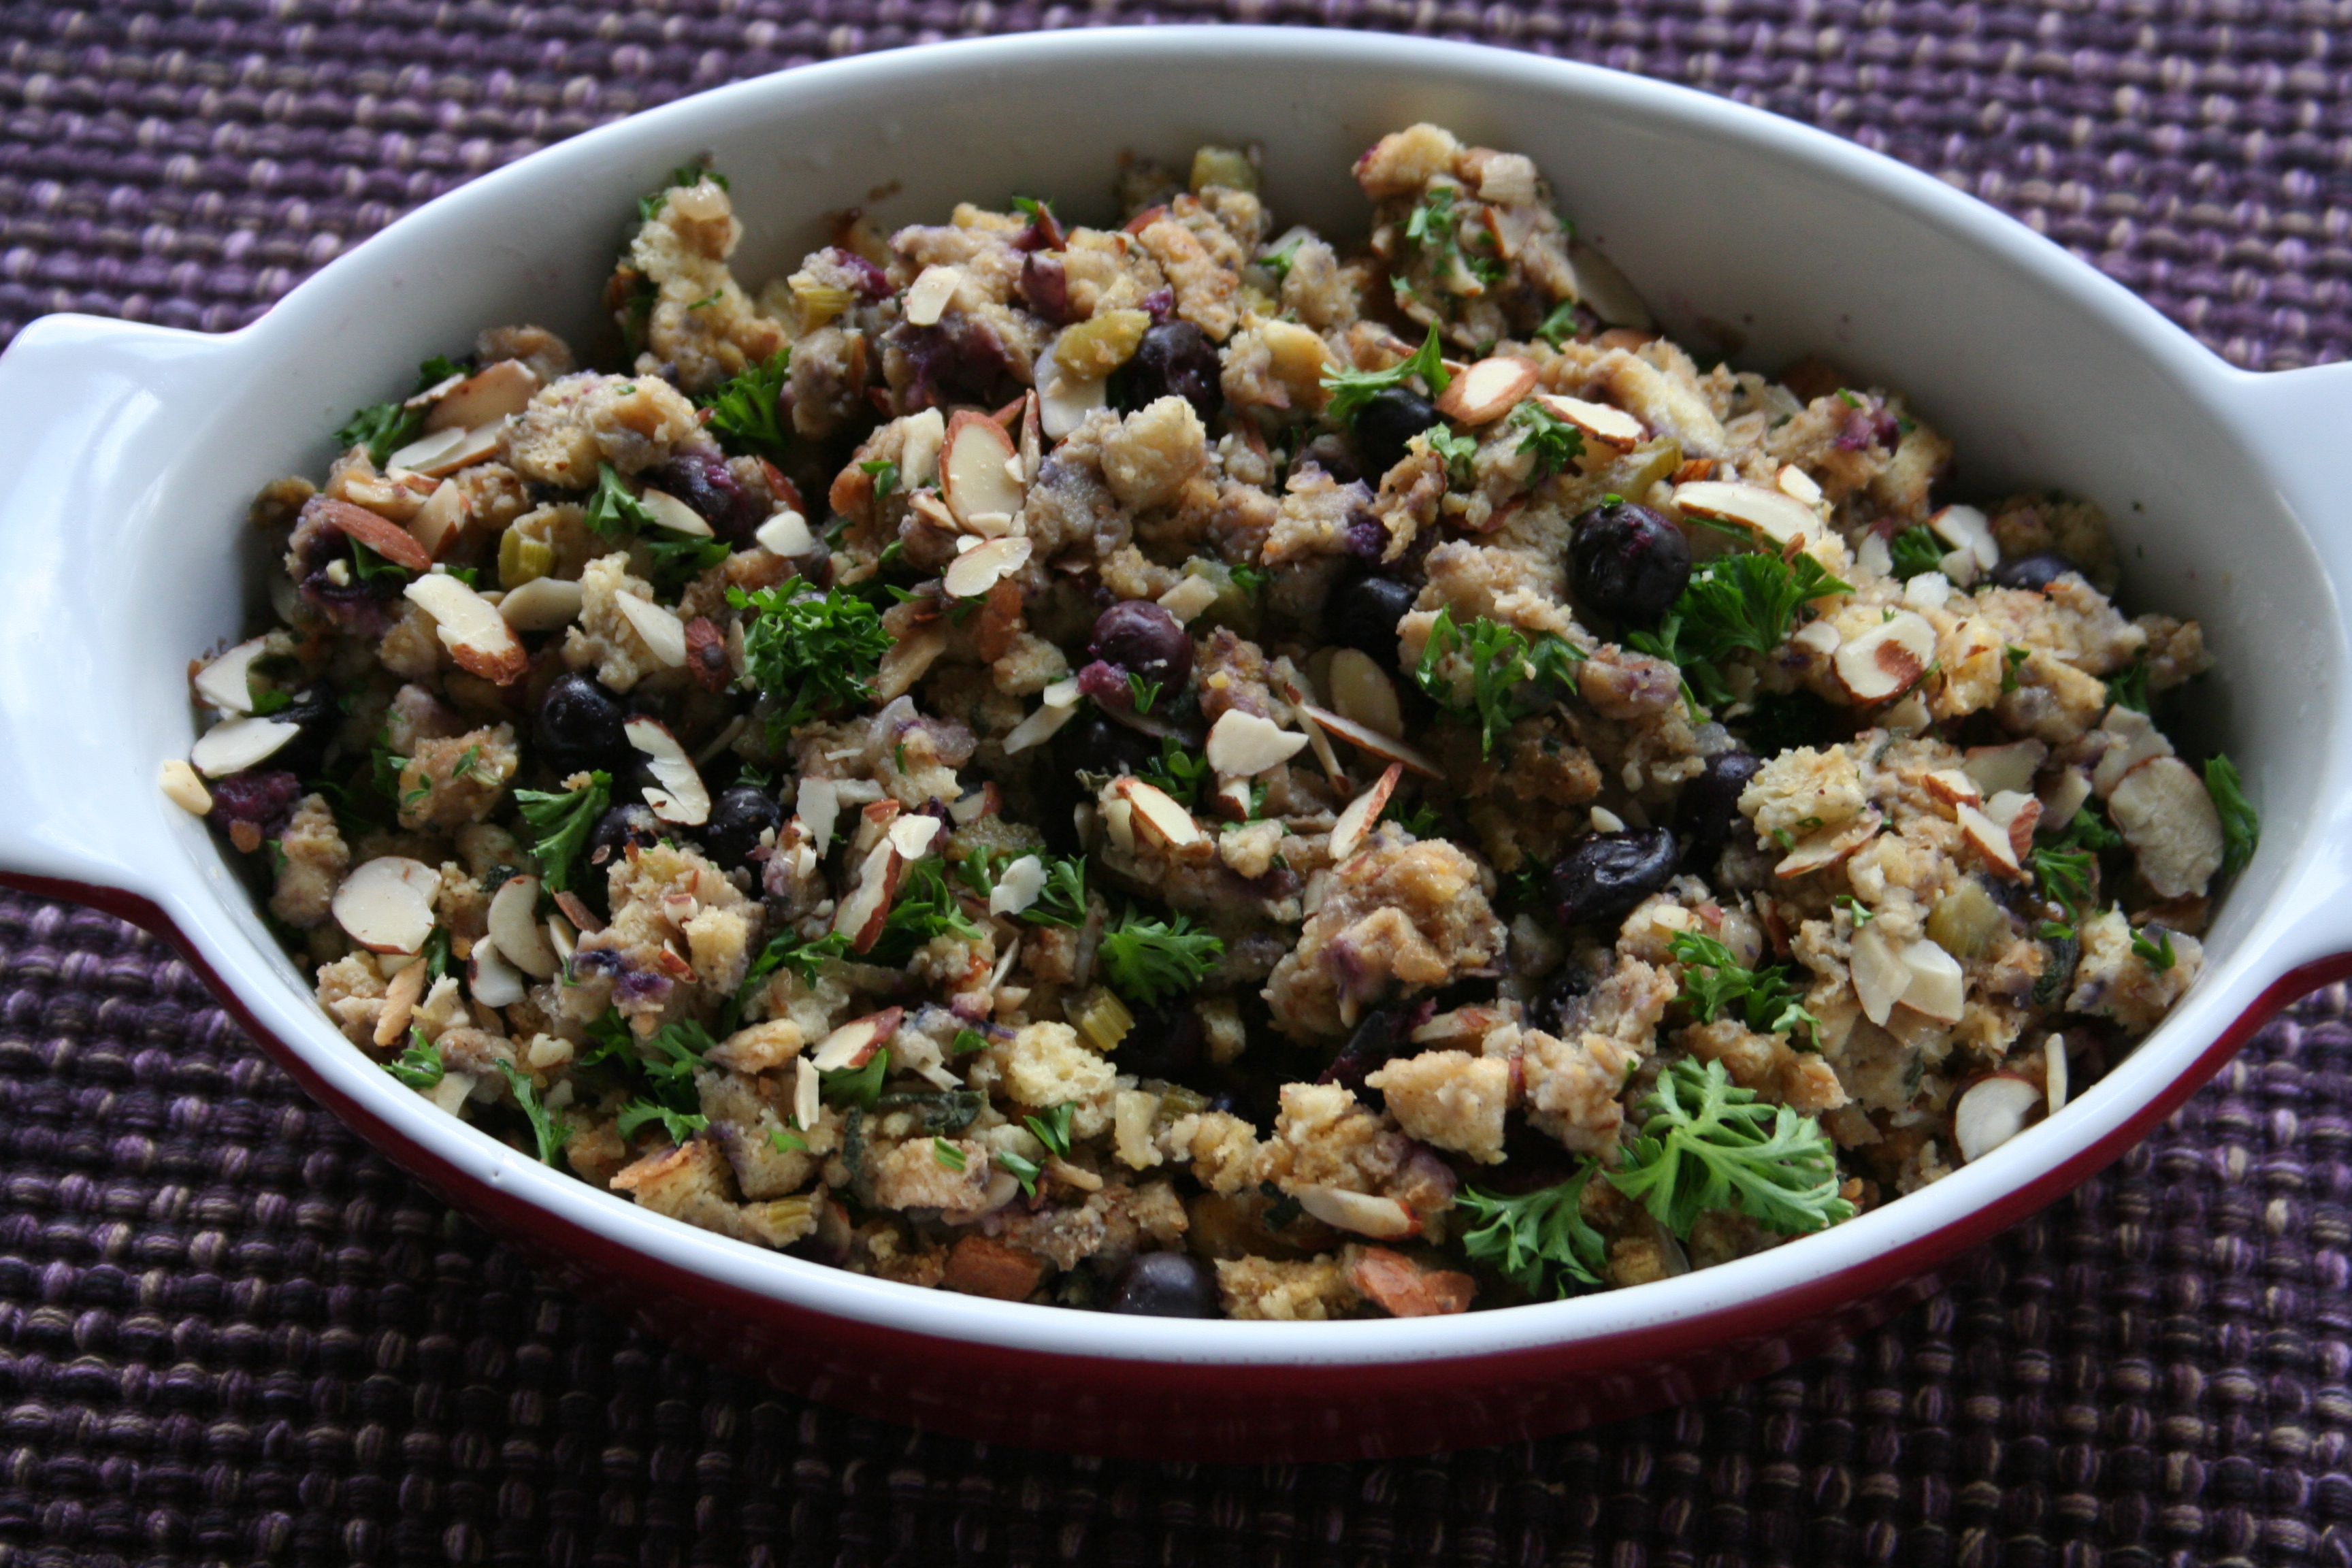 Blueberry and Almond Stuffing